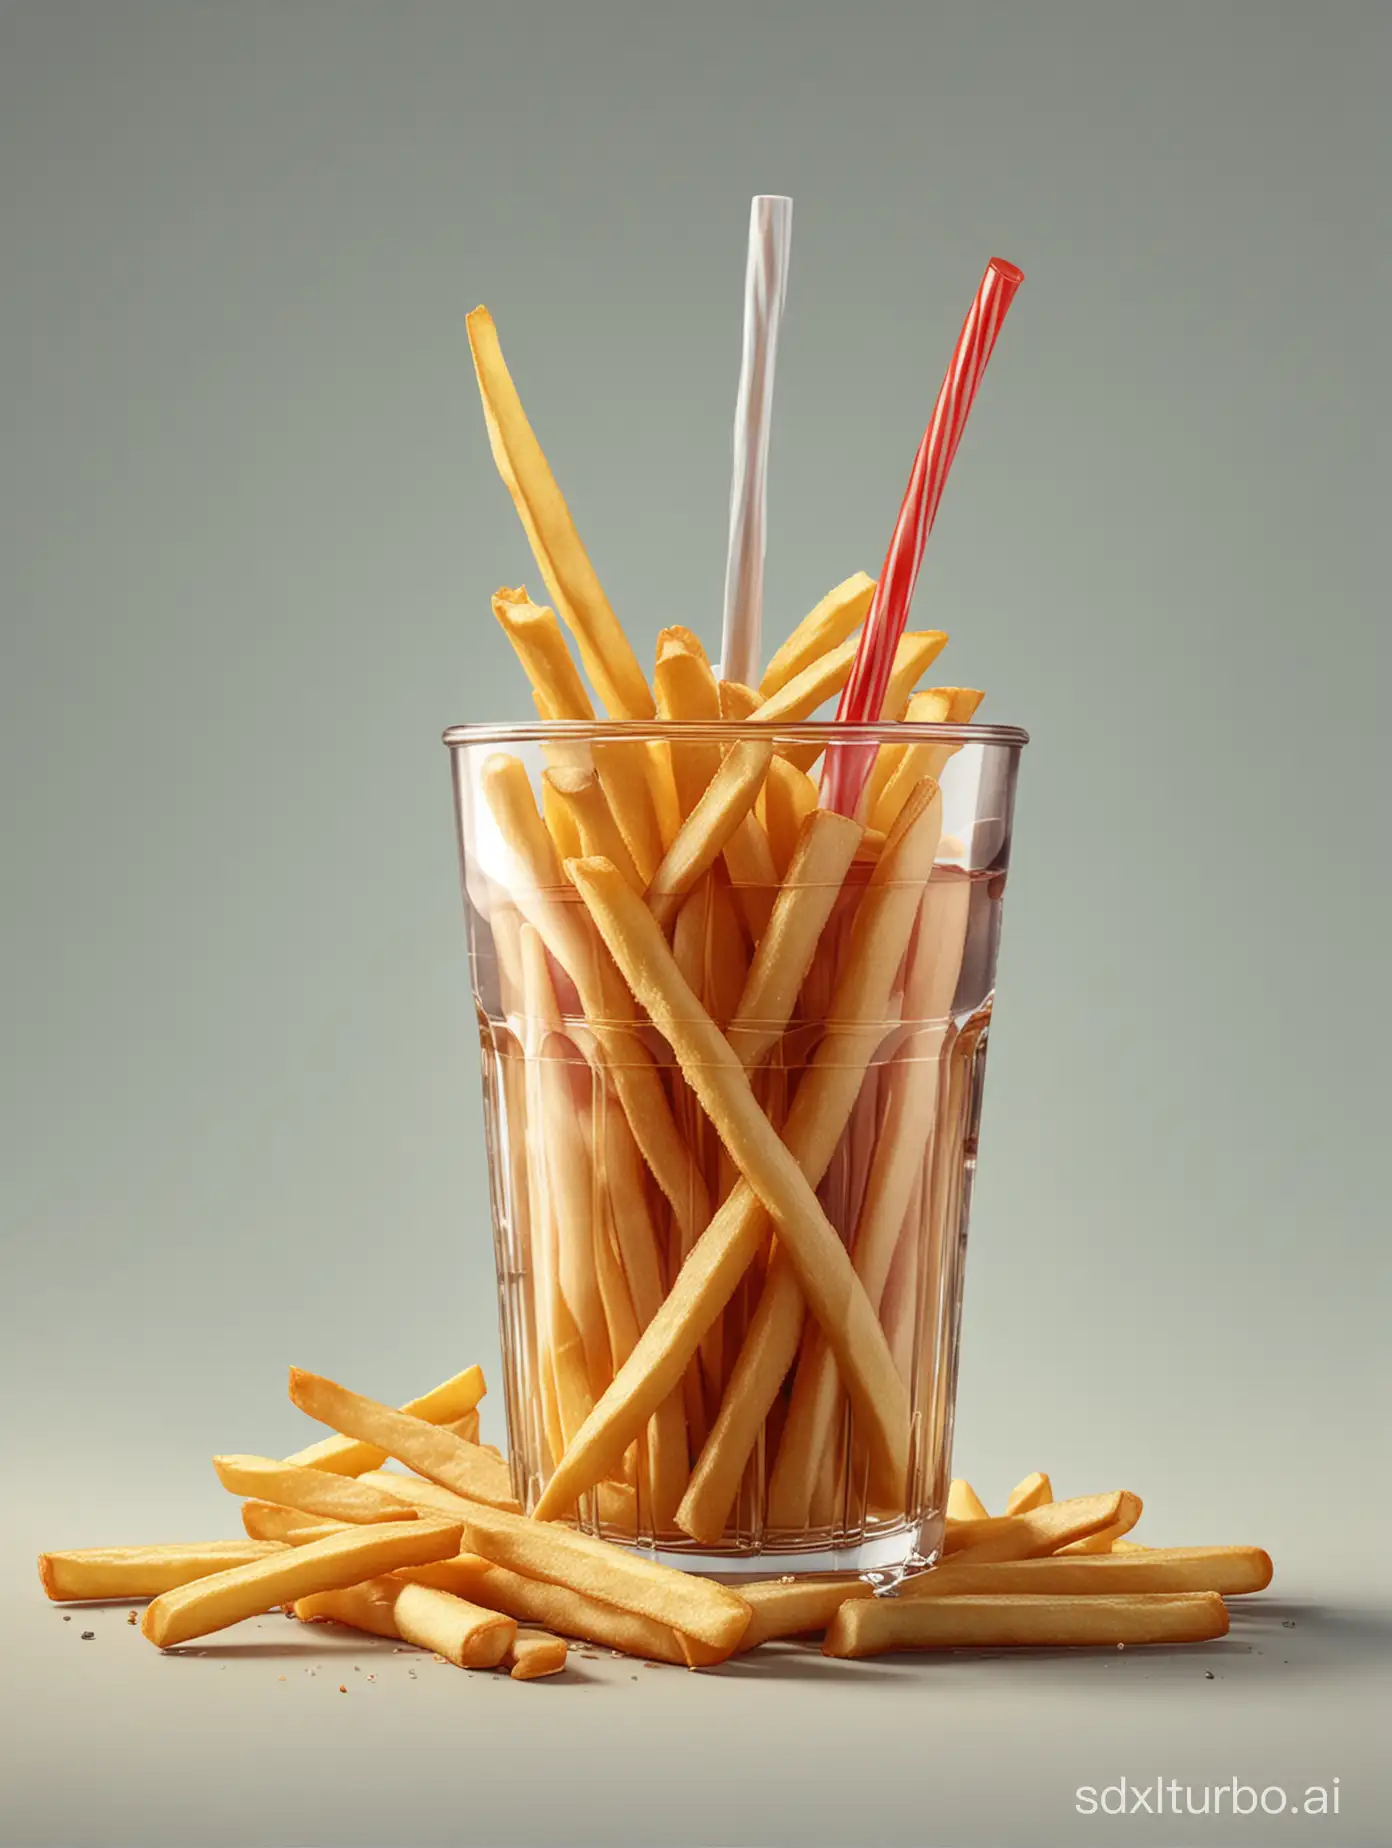 French fries, soda glass with straw, burger, realistic